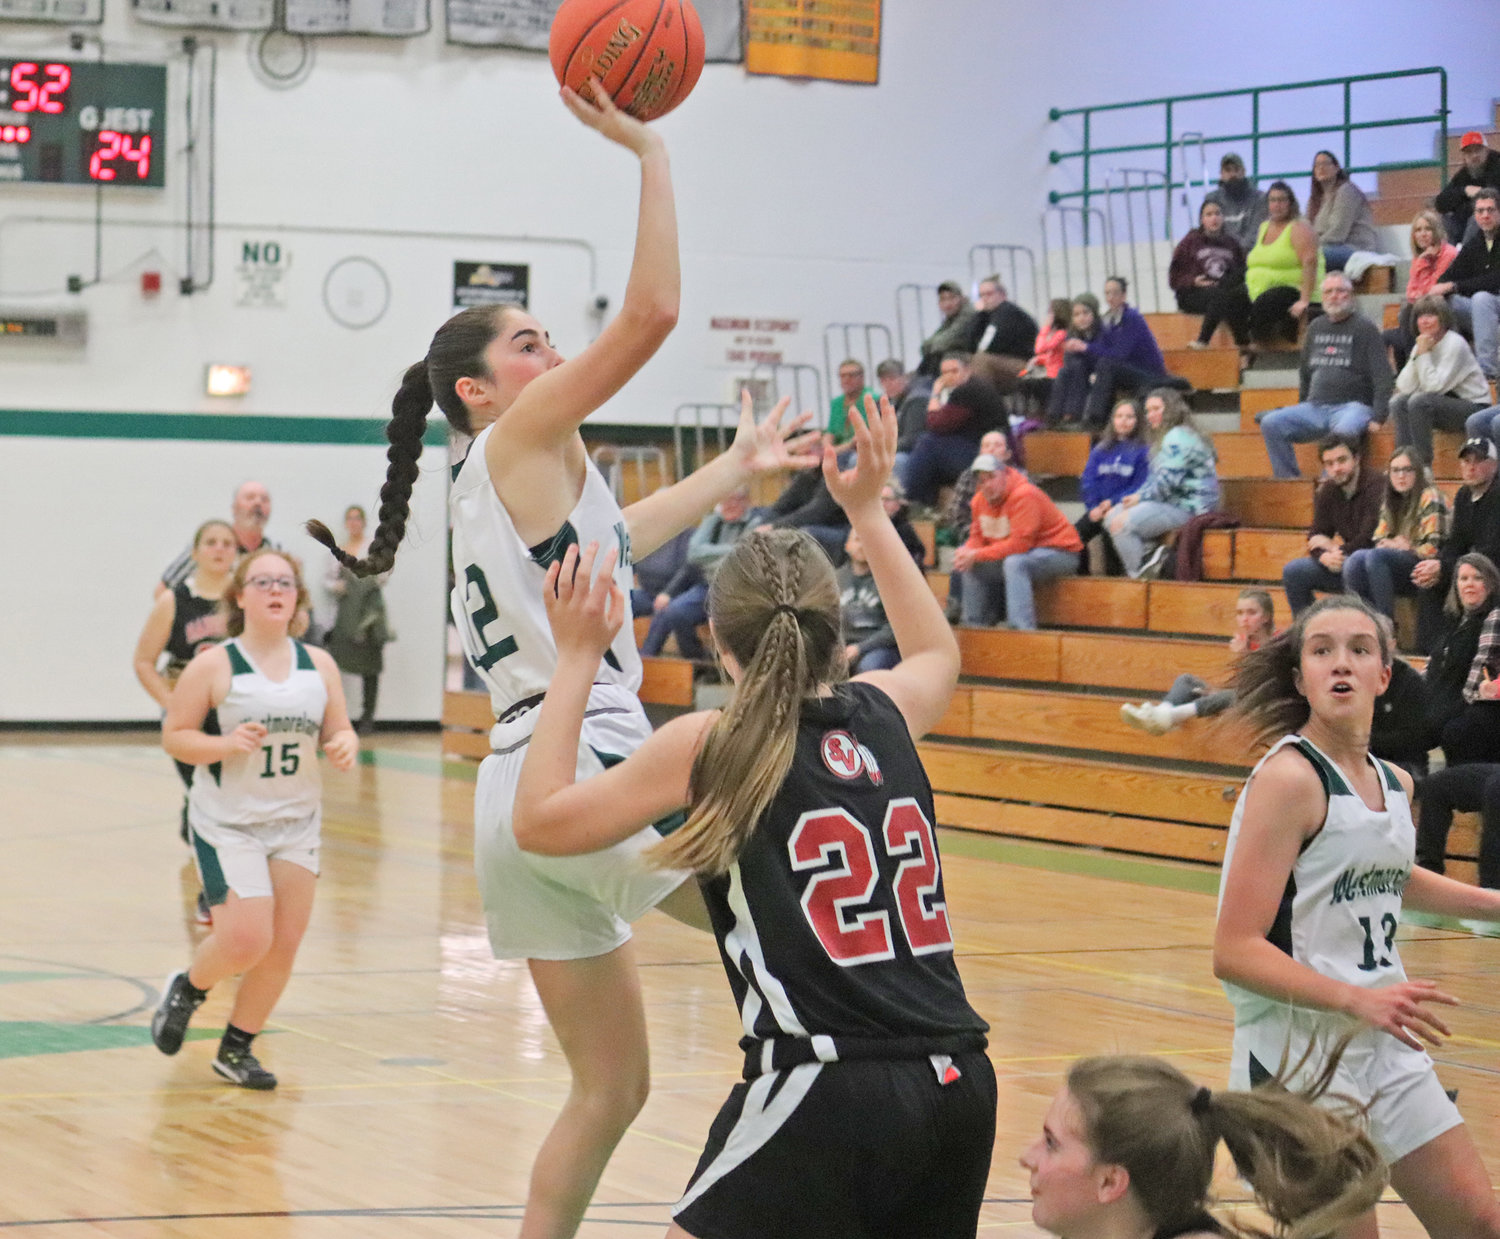 Westmoreland's Ella McGregor gets off a shot defended by Makayla Land of Sauquoit Valley Friday at home. McGregor scored six points in the team's 55-29 win.